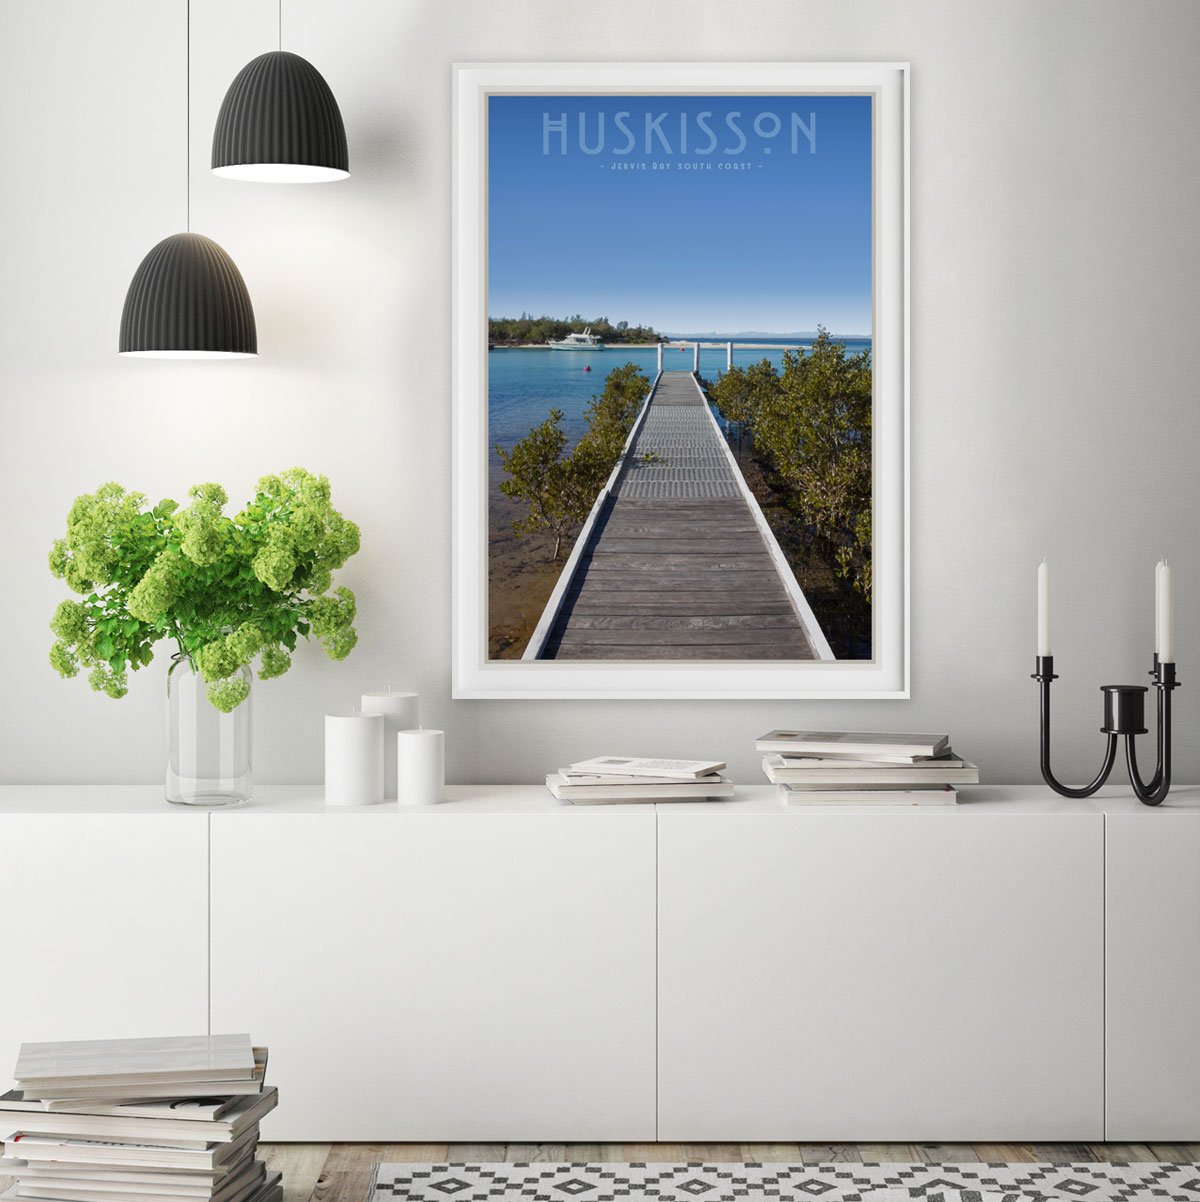 Huskisson vintage travel style framed print by places we luv